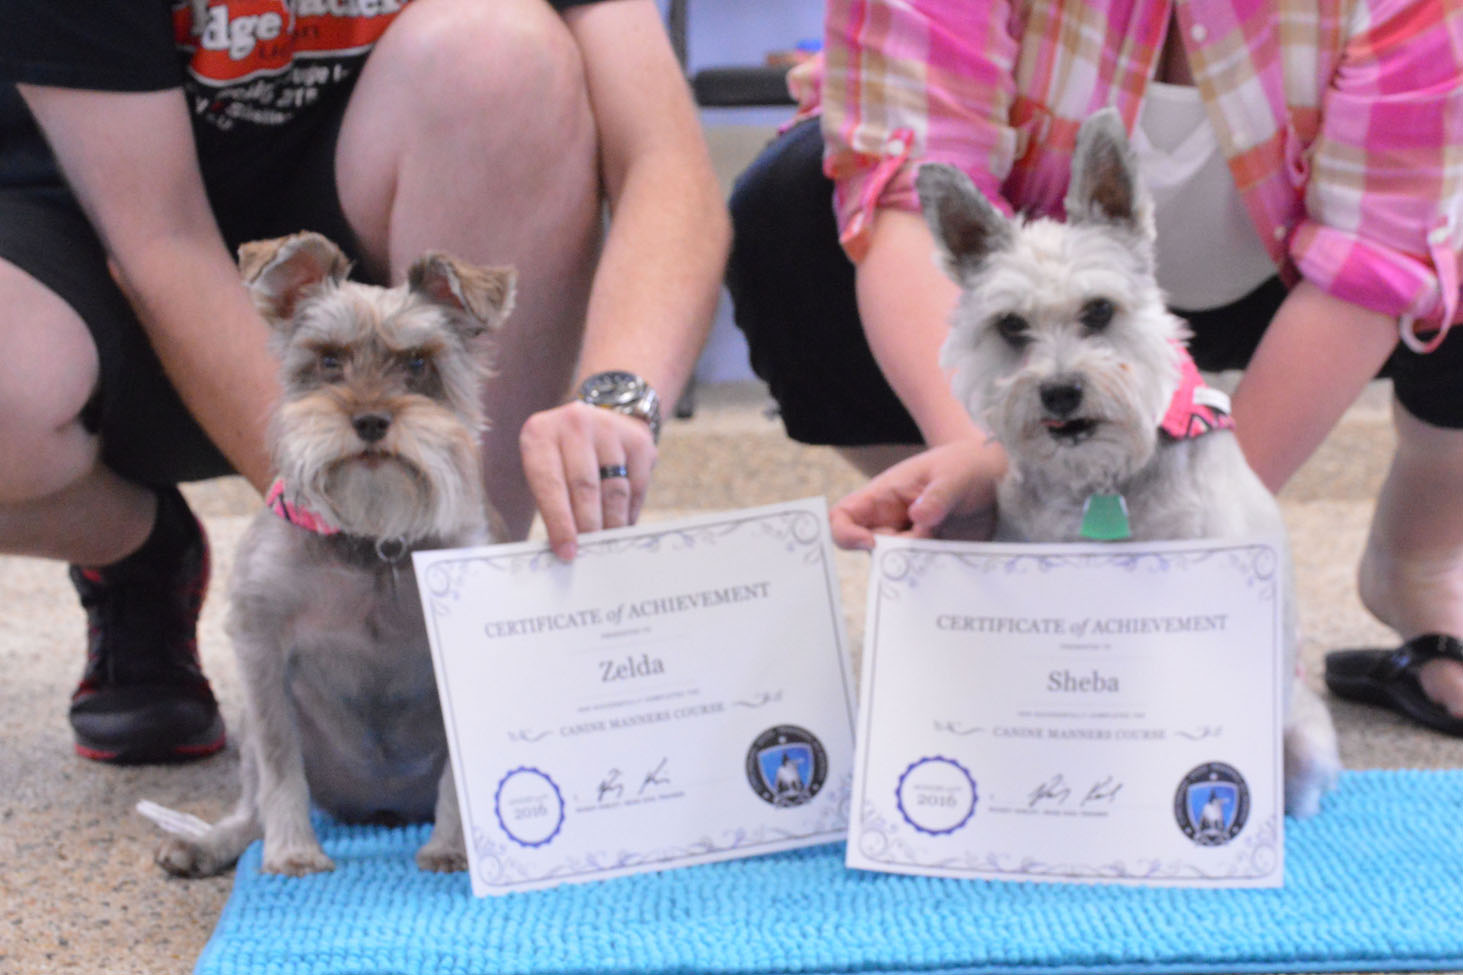 Gary's Professional Dog Grooming - dogs with owners and their training certificates